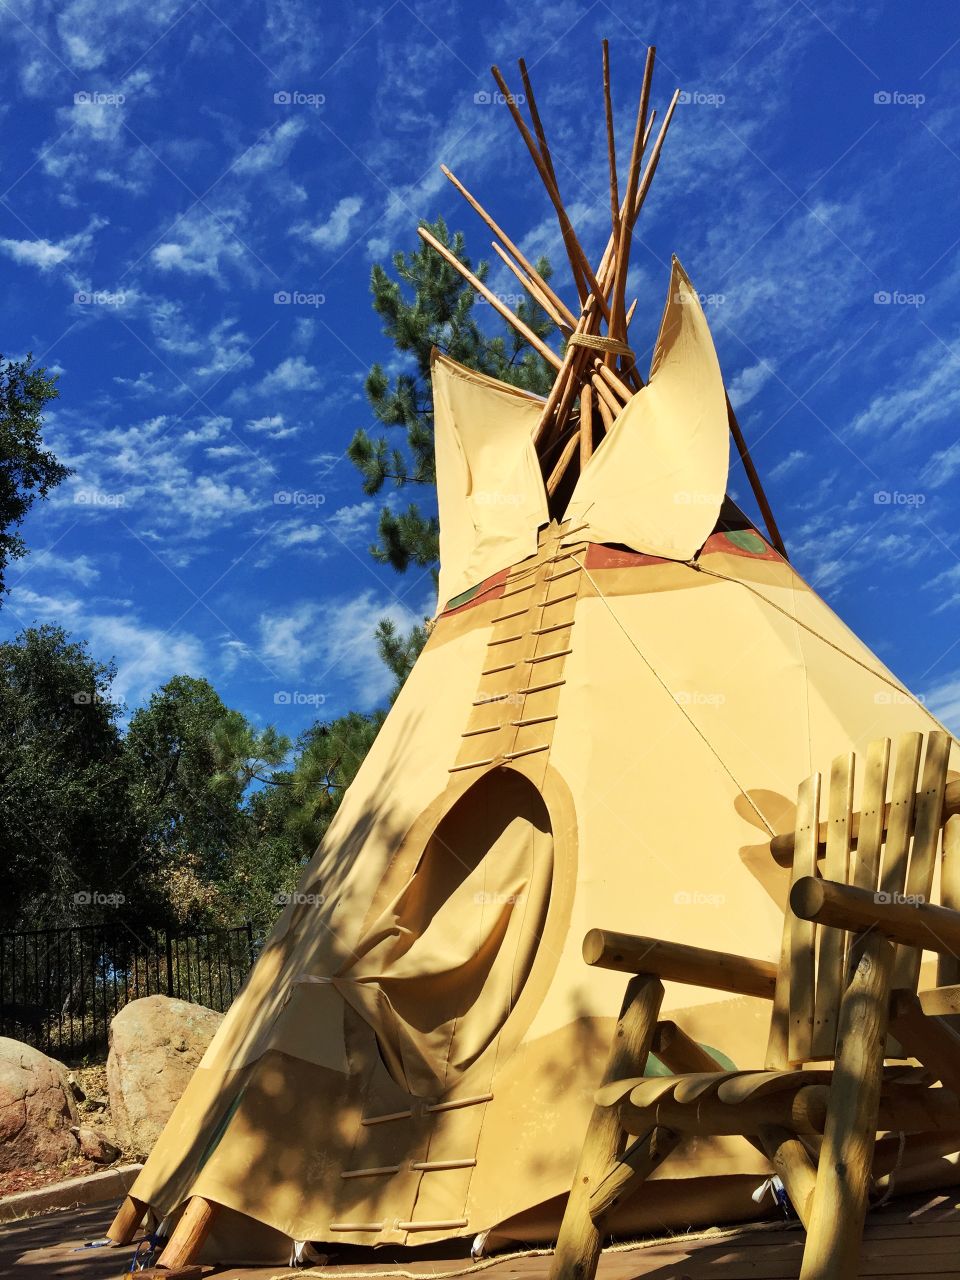 Tipi. One day me and my friends camped out in my backyard my dad said he was inspired. The next day he bought this